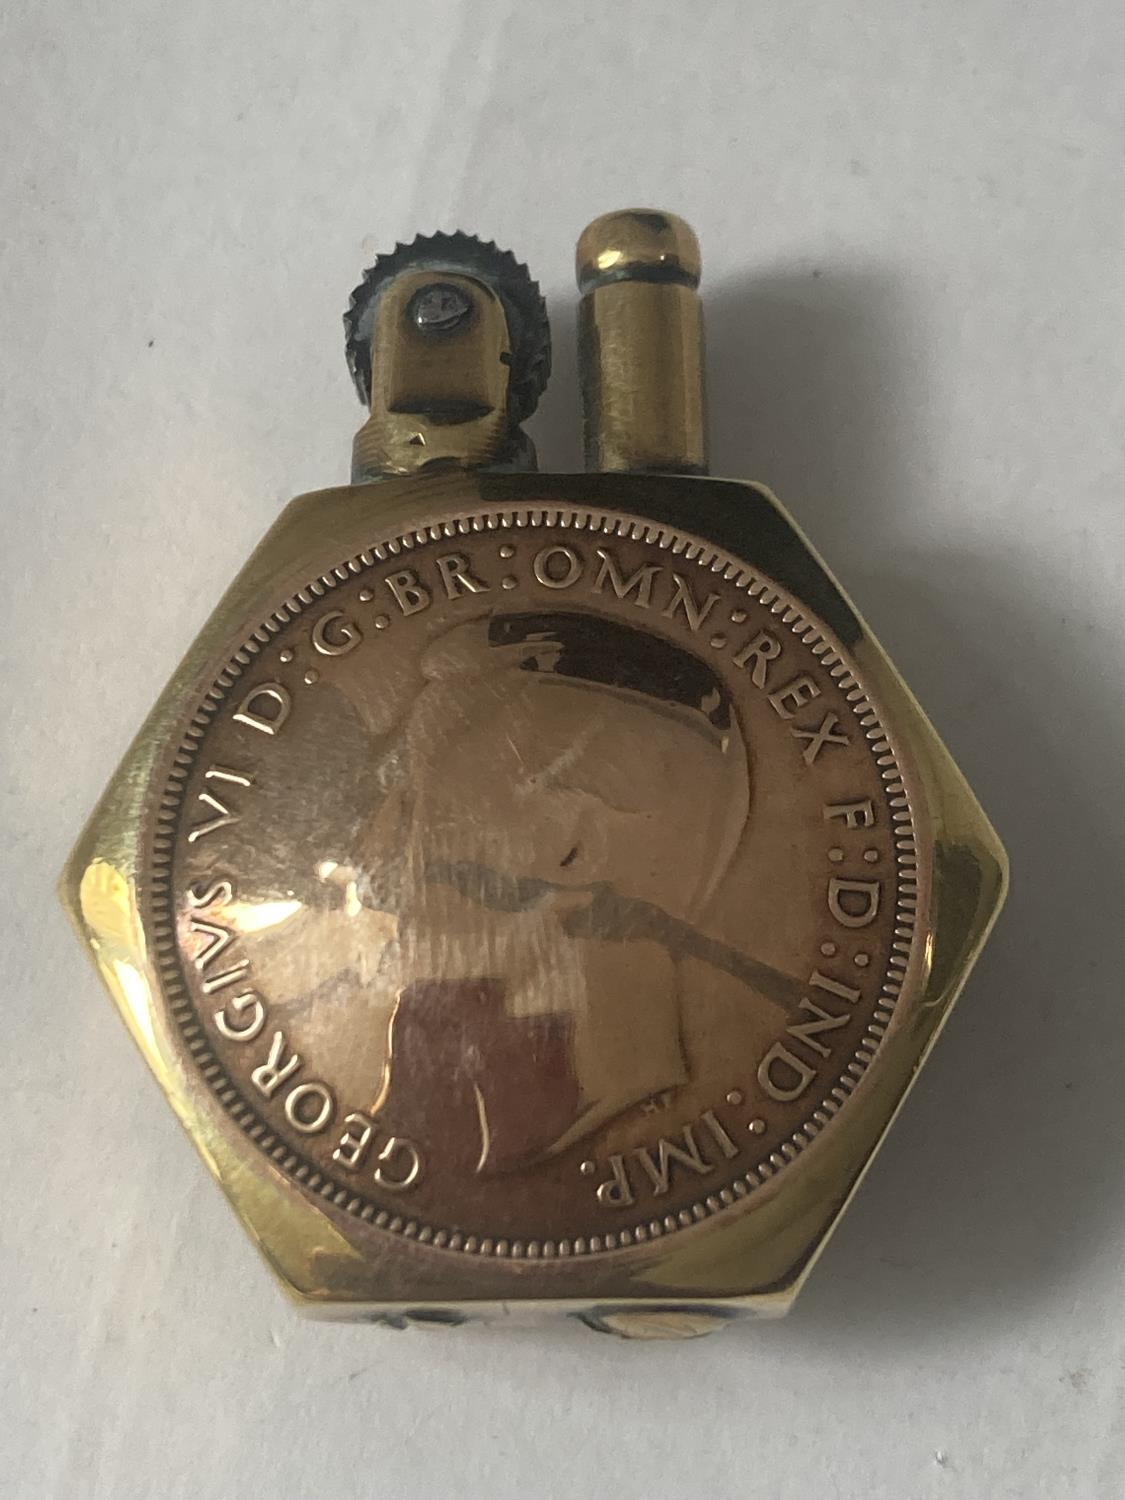 A 1937 ONE PENNY TRENCH ART LIGHTER - Image 2 of 4